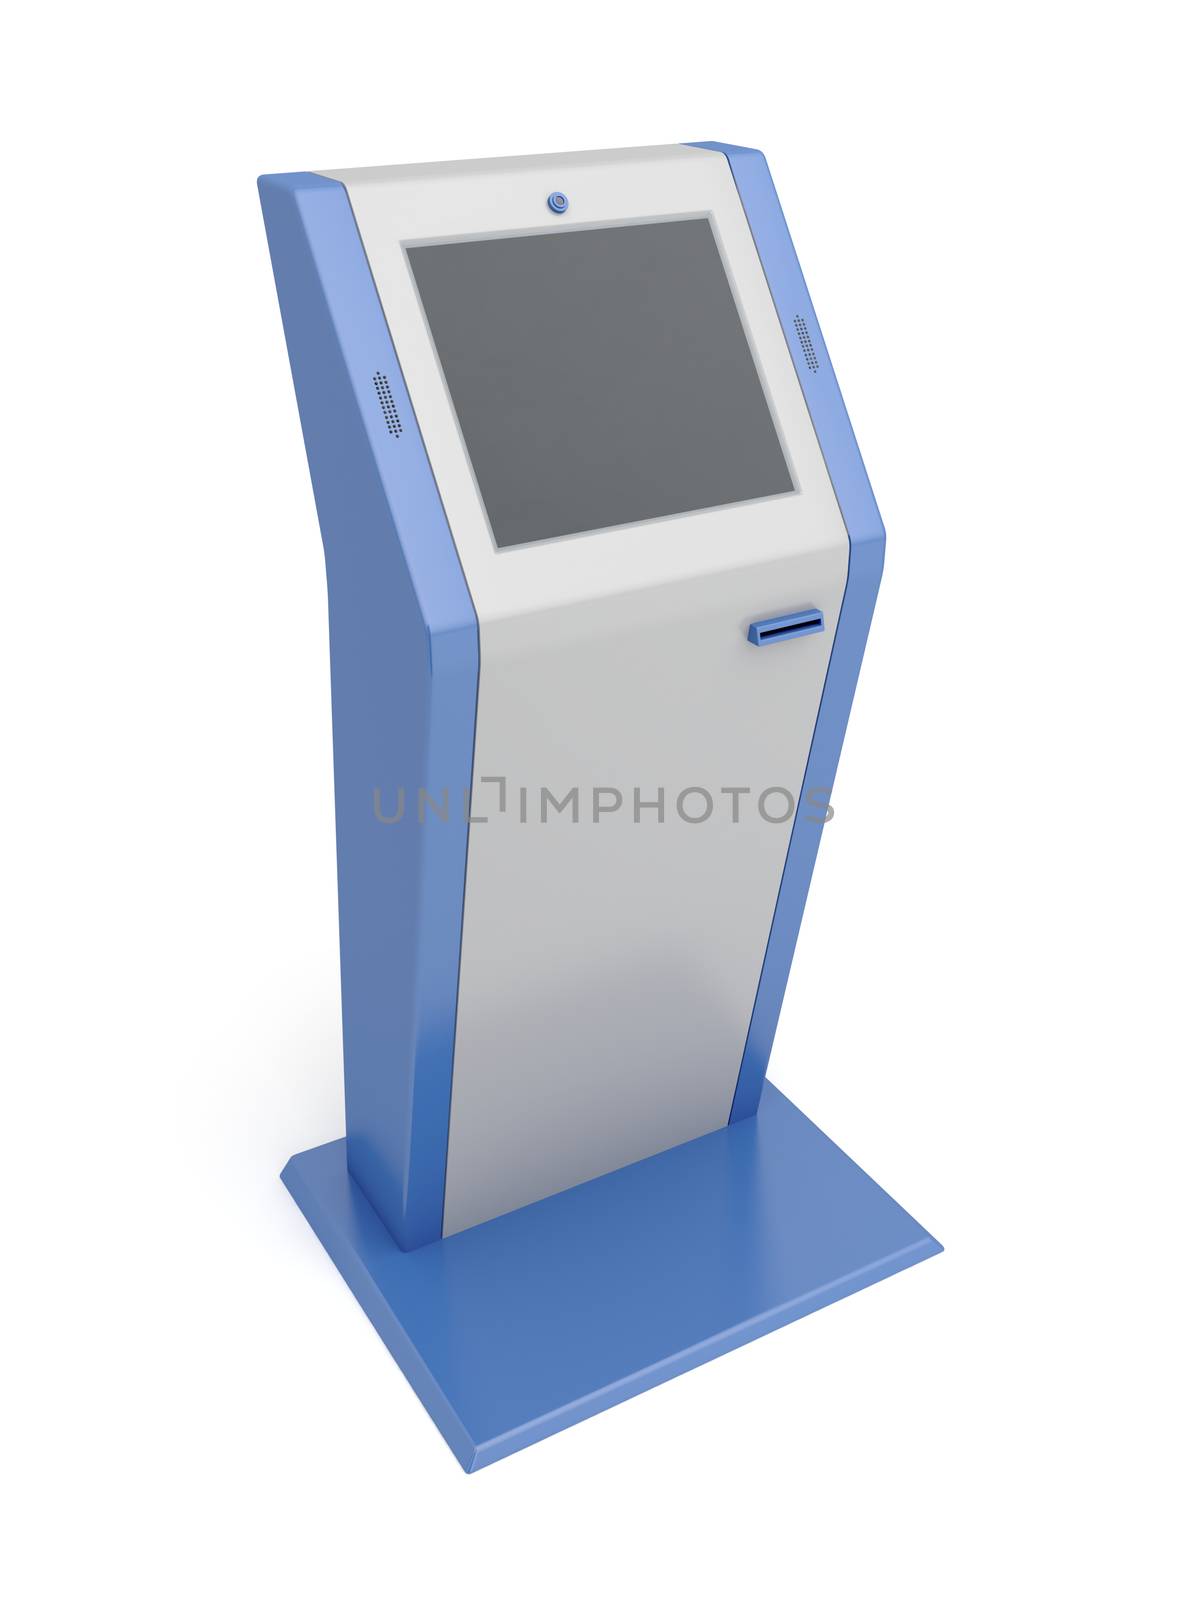 Touch screen terminal by magraphics